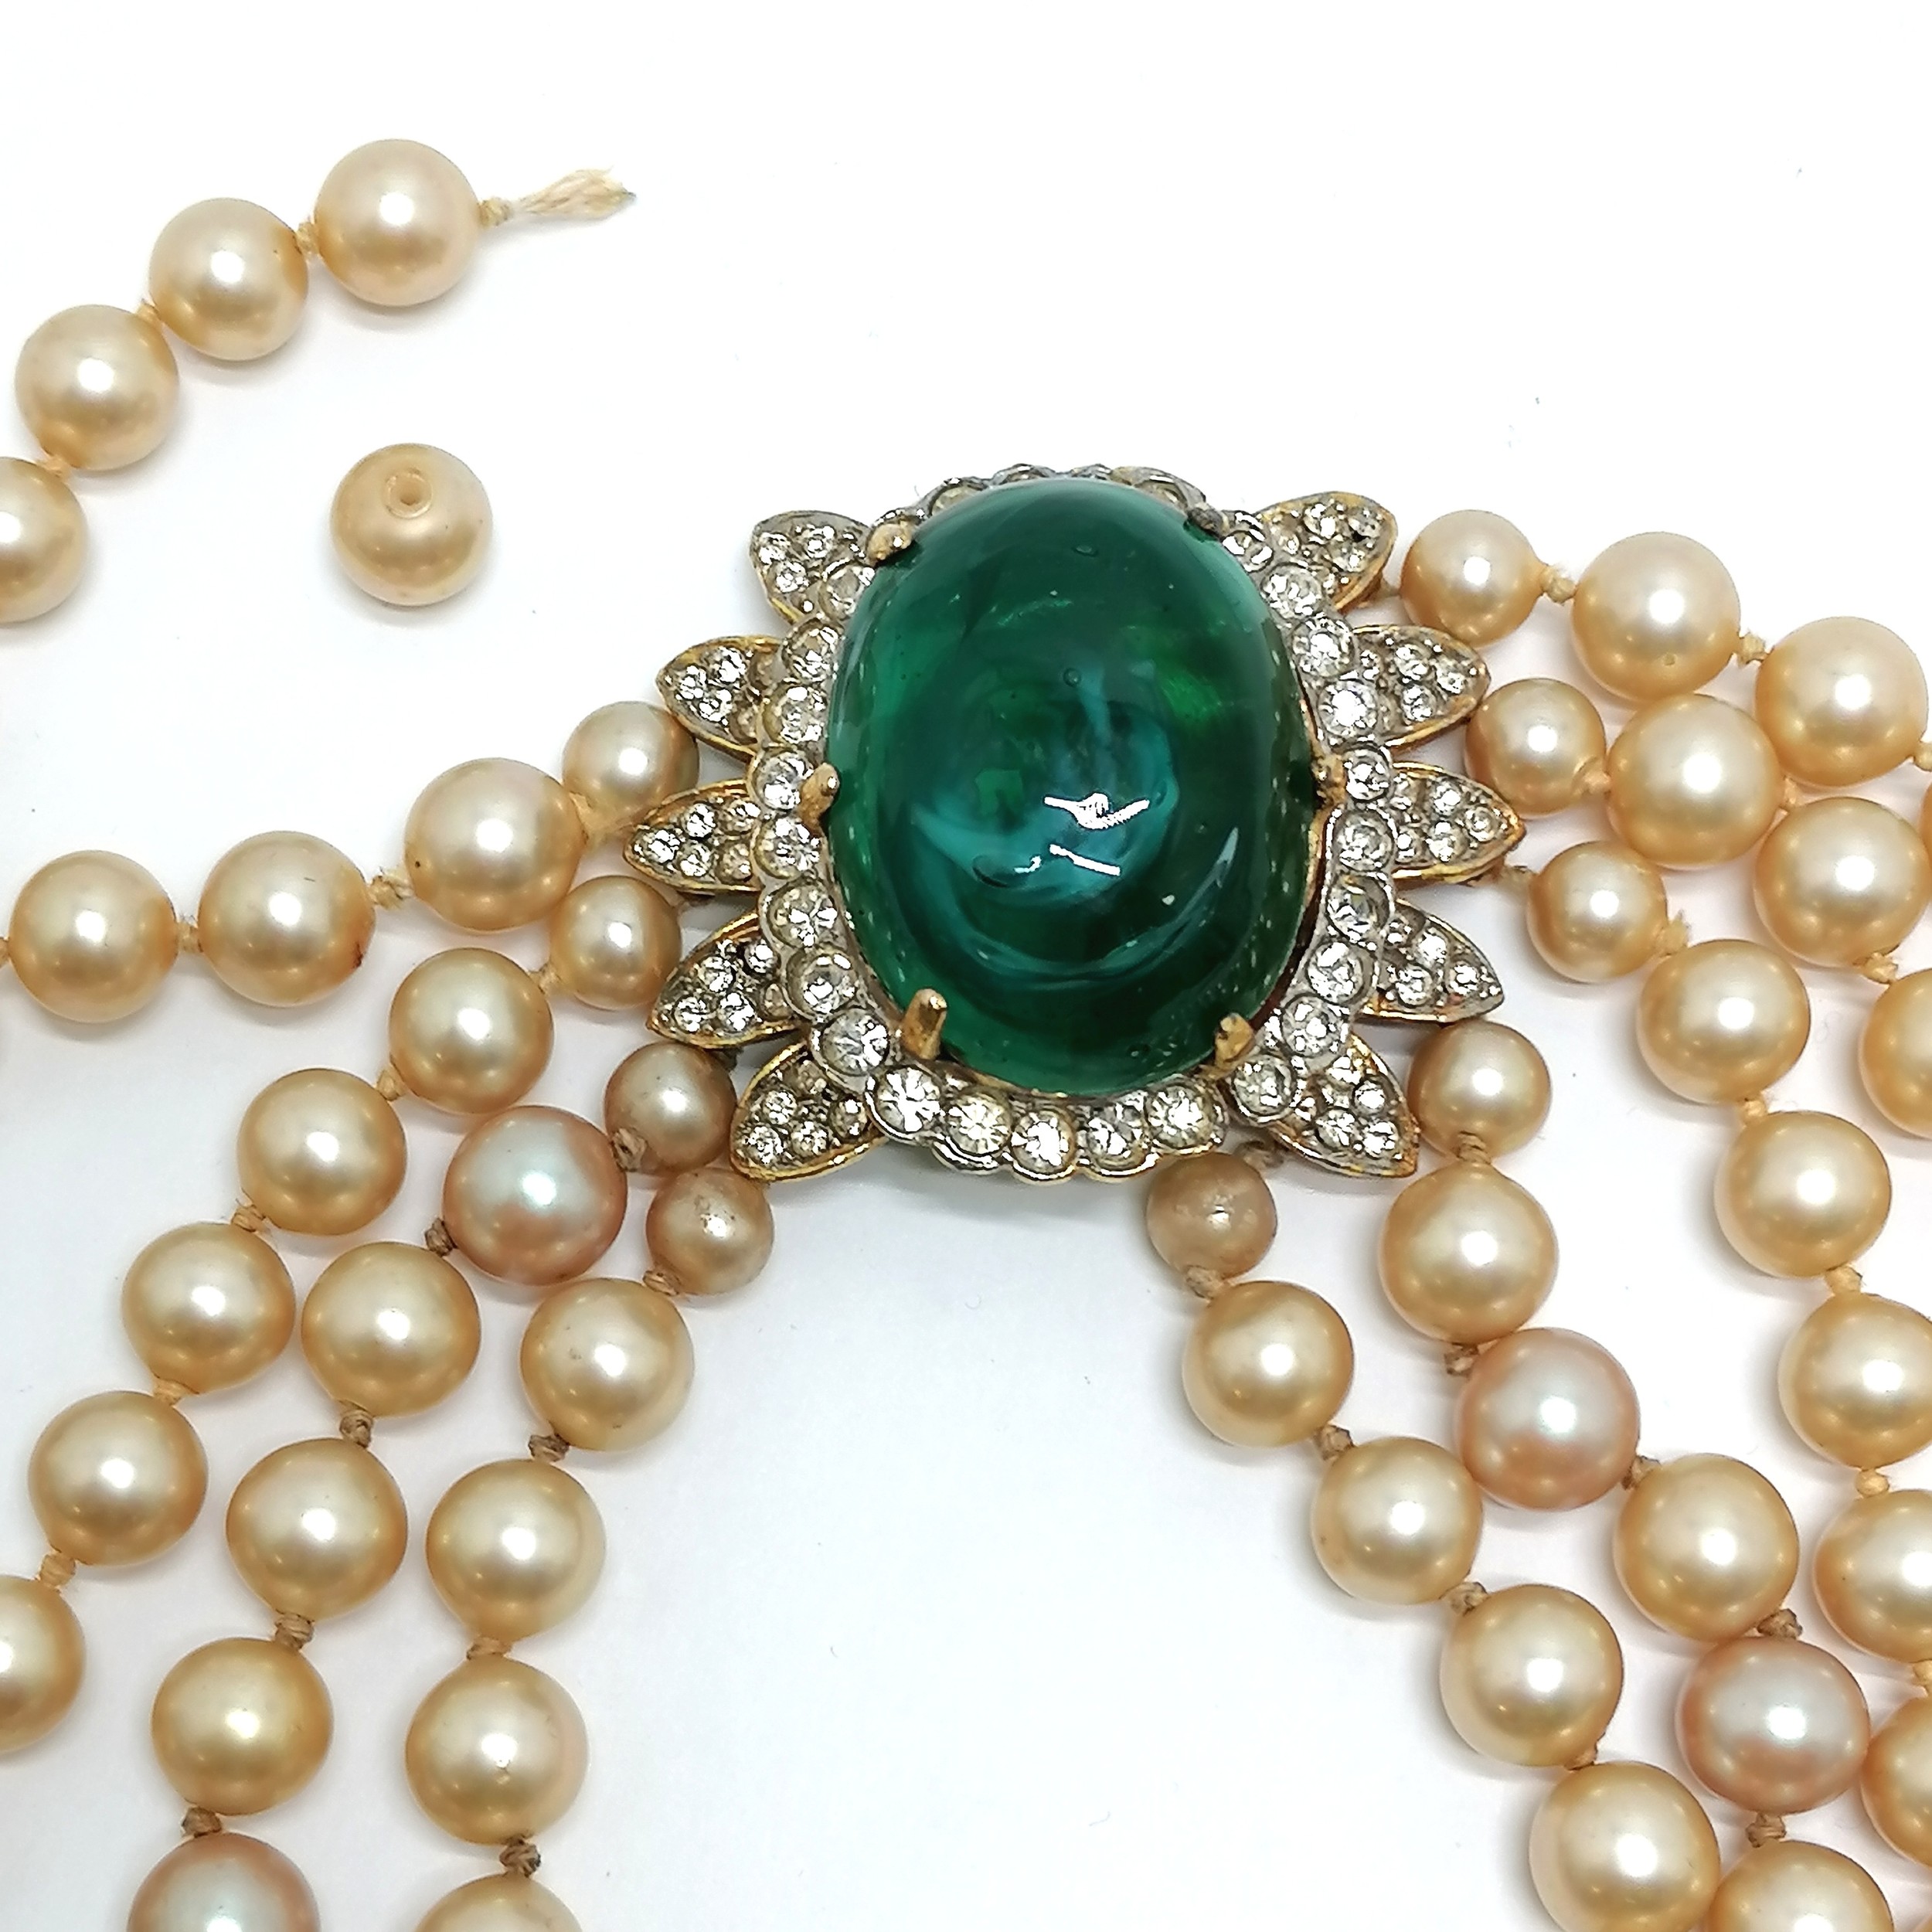 Impressive 5 strand faux pearl necklace with large green and white paste clasp - 68cm long & - Image 3 of 3